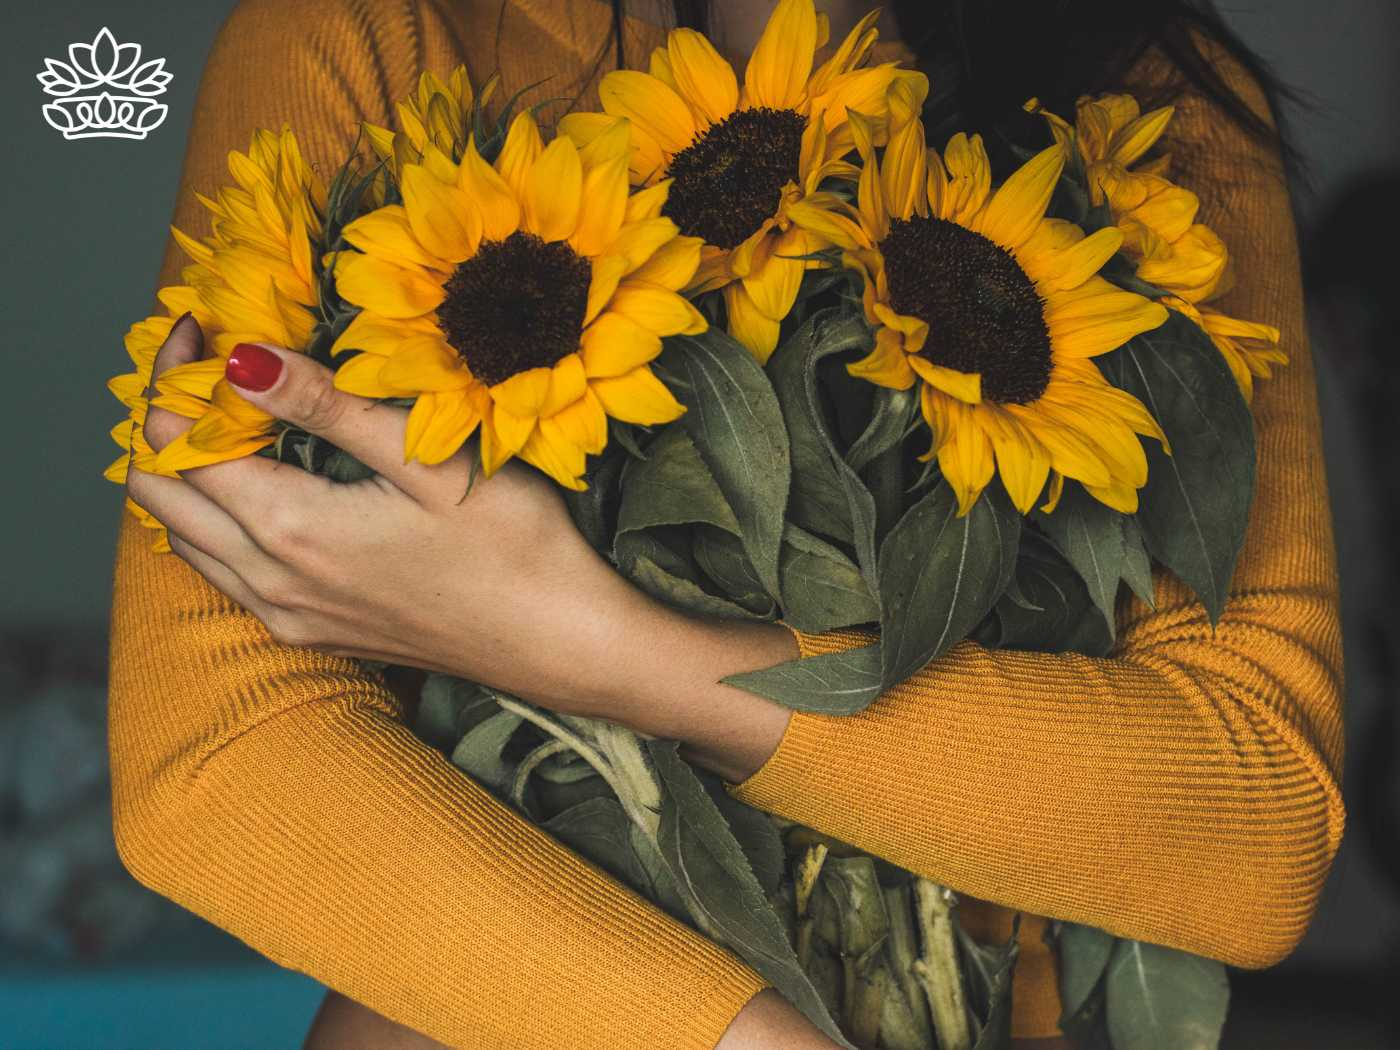 A woman in a yellow sweater cradling a bouquet of bright sunflowers, part of the Sunflowers Collection by Fabulous Flowers and Gifts. This image captures a page of autumn warmth and vivid yellow hues, highlighting the beauty of sunflower bouquets.